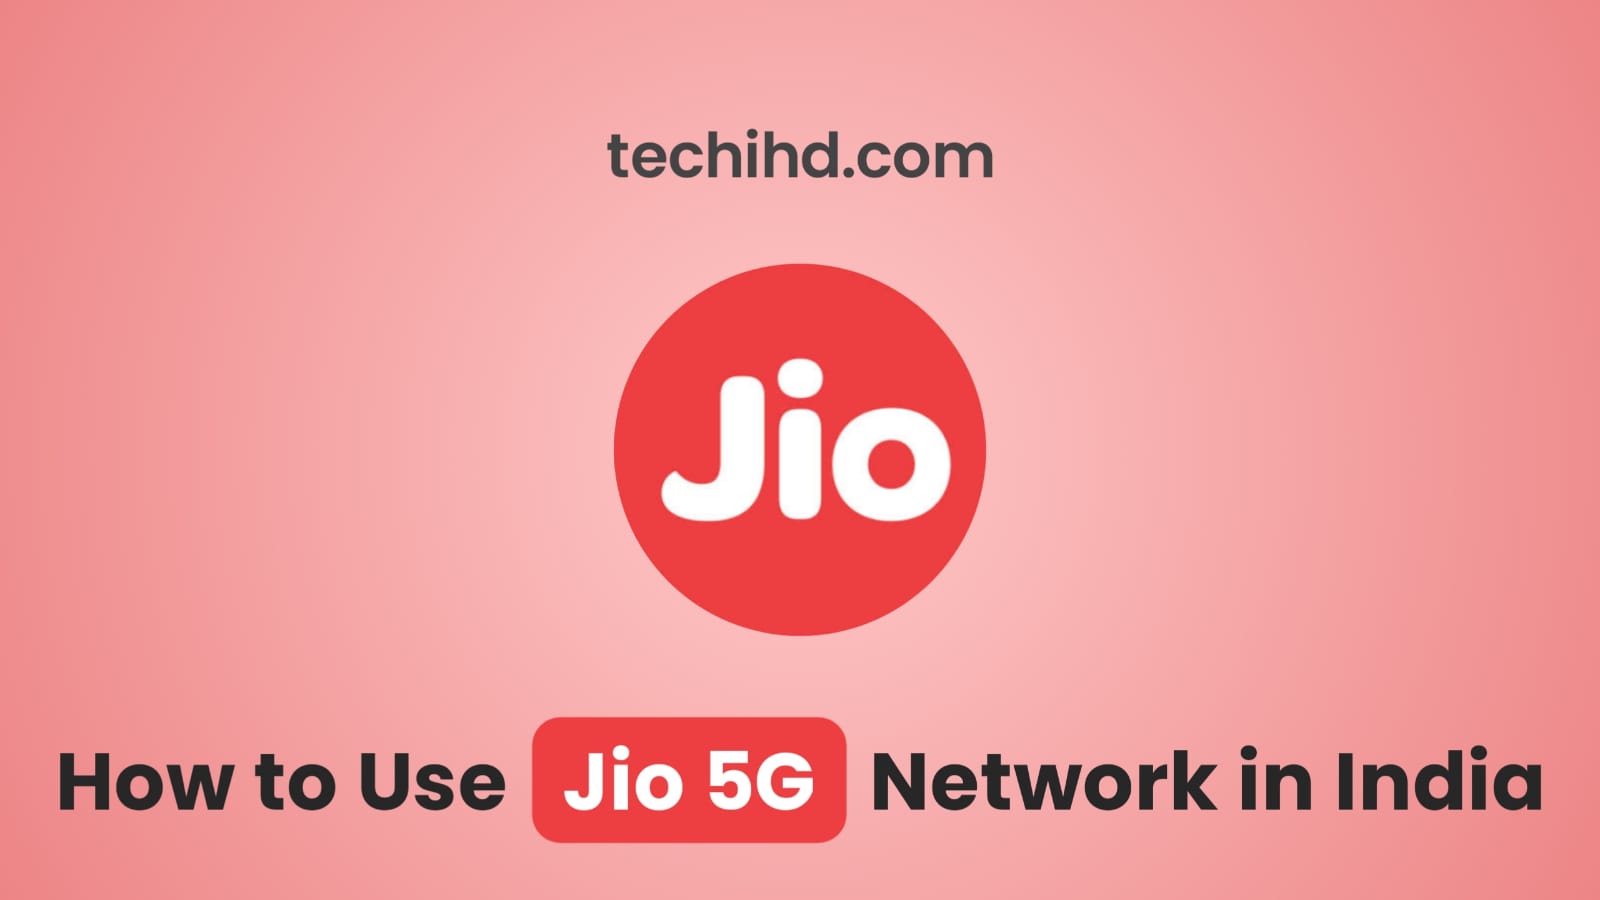 How to Use Jio 5G Network in India